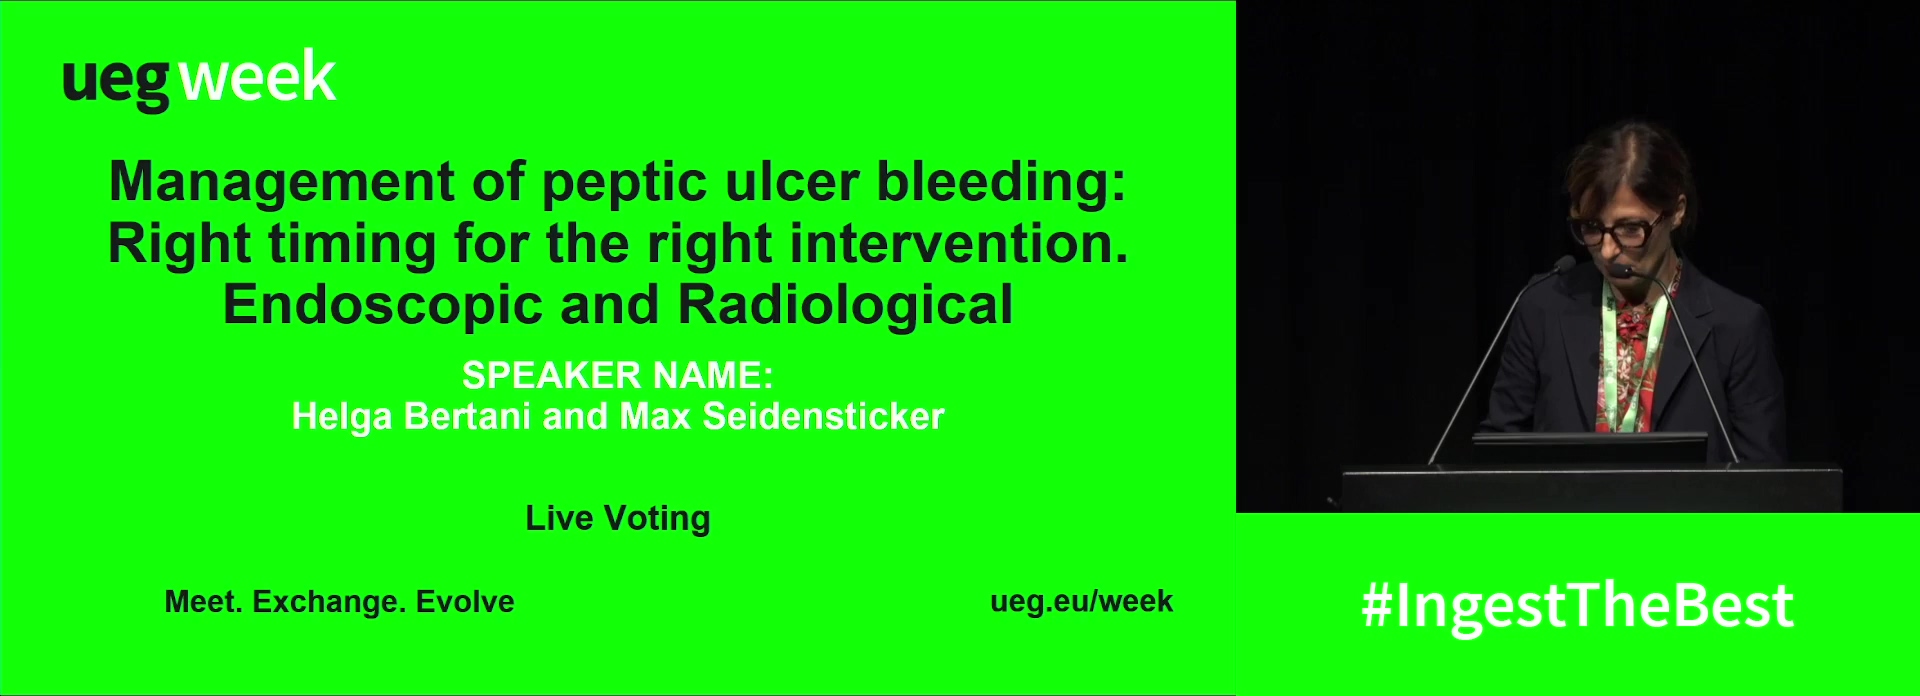 Management of peptic ulcer bleeding: Right timing for the right intervention (endoscopic and radiological)